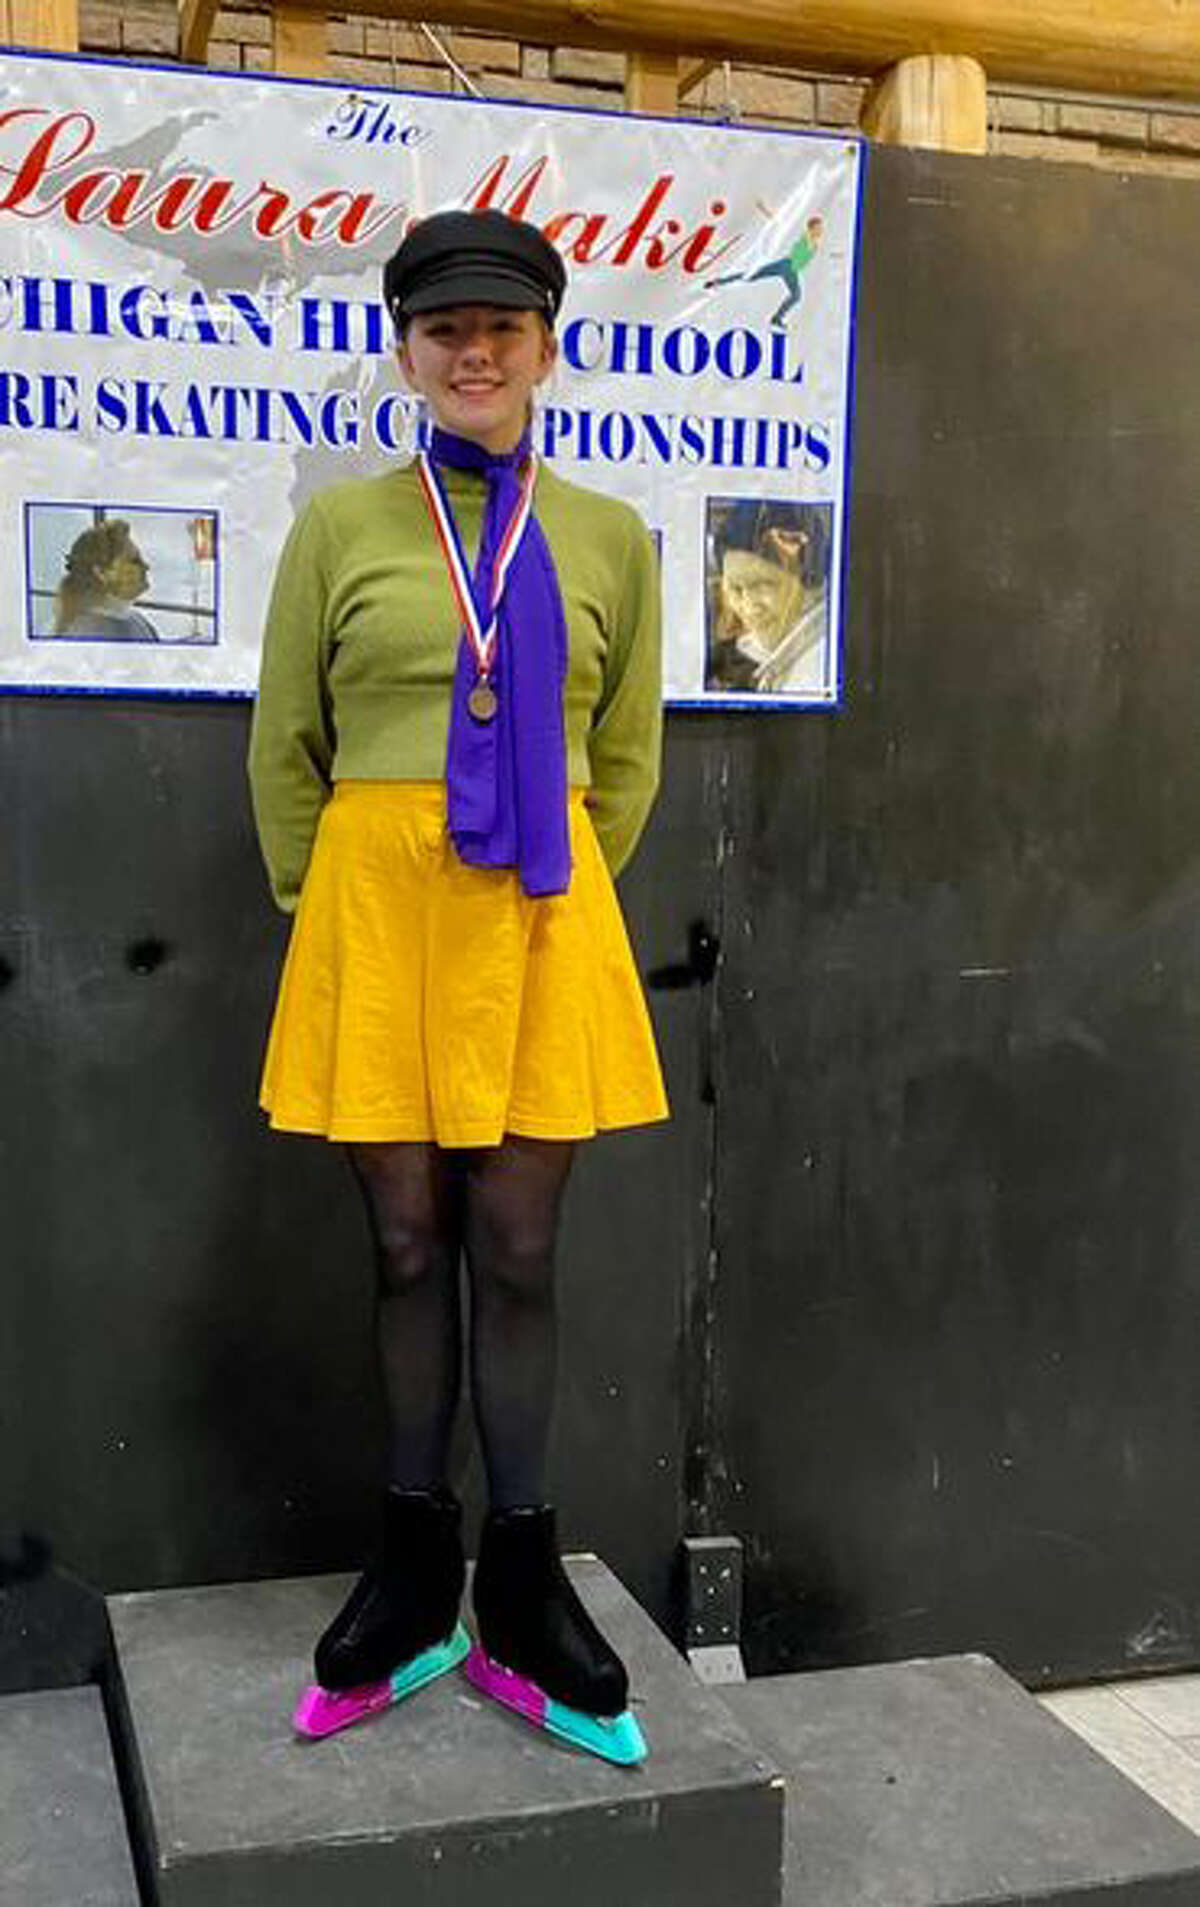 Midland Area's Ciarra Franklin poses with her state championship medal after winning the Pre-Silver Dance title in ice dancing at the high school state finals in Brighton recently.